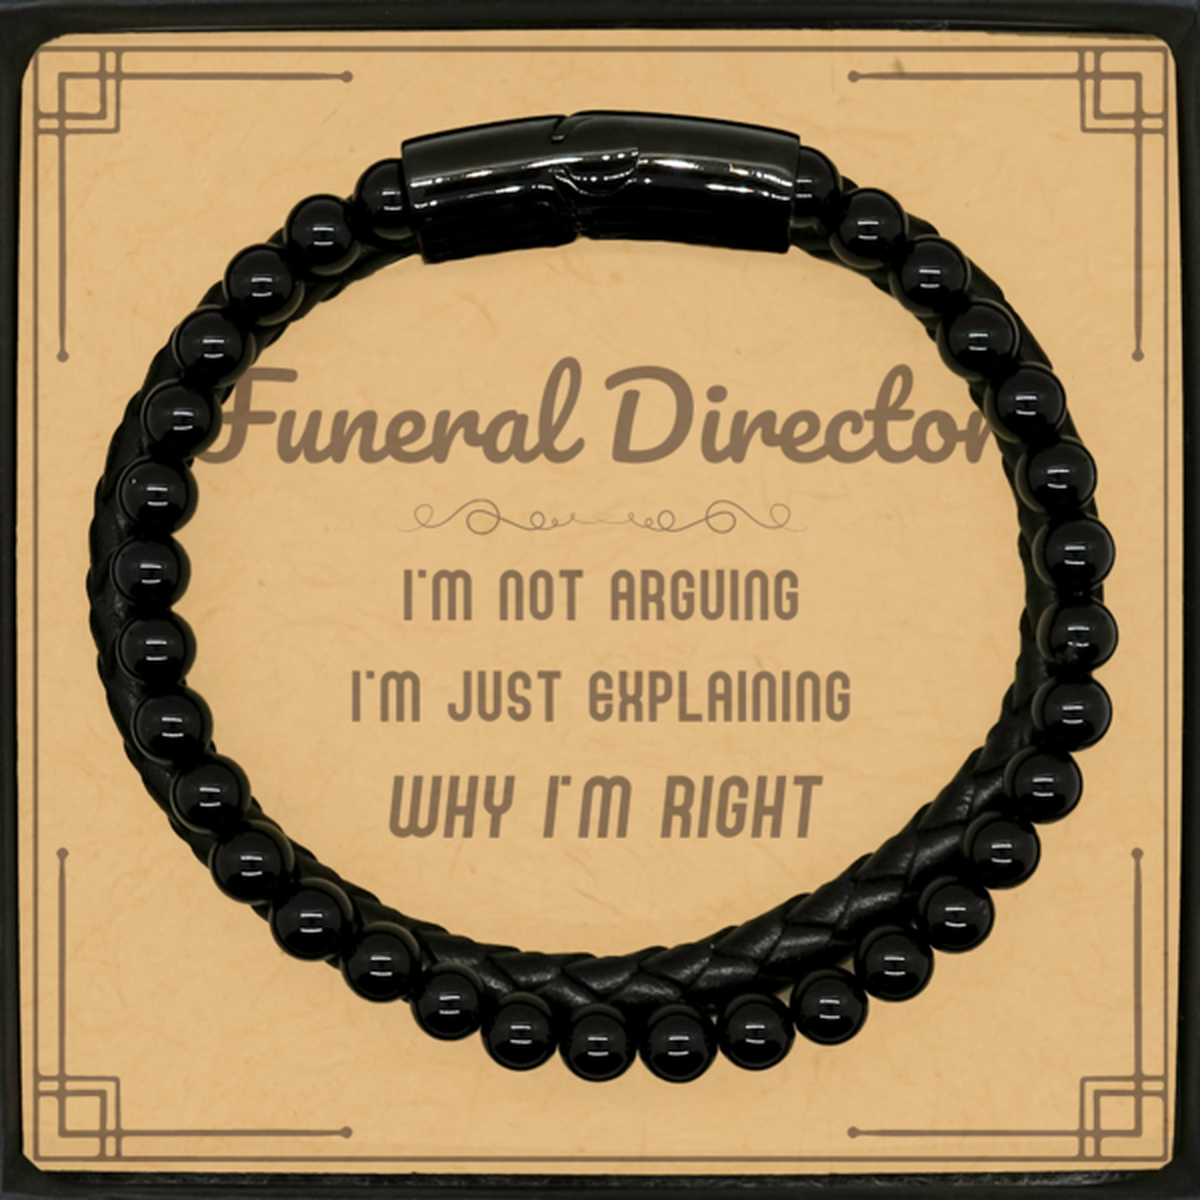 Funeral Director I'm not Arguing. I'm Just Explaining Why I'm RIGHT Stone Leather Bracelets, Funny Saying Quote Funeral Director Gifts For Funeral Director Message Card Graduation Birthday Christmas Gifts for Men Women Coworker